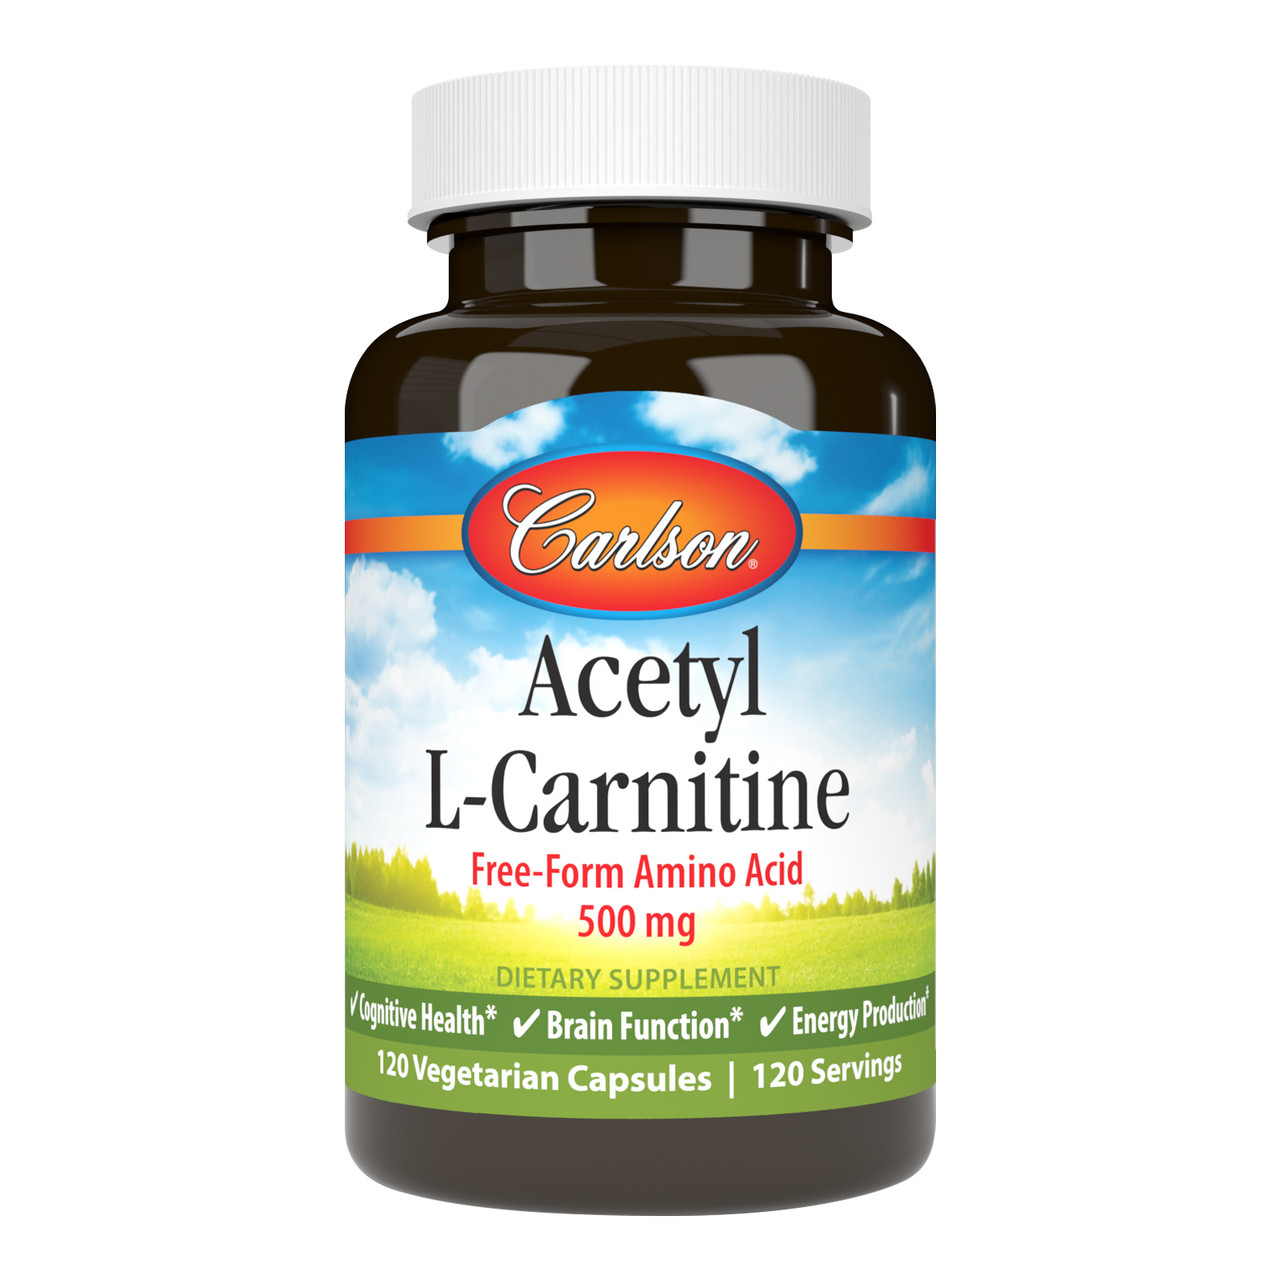 L-carnitine and cognitive function